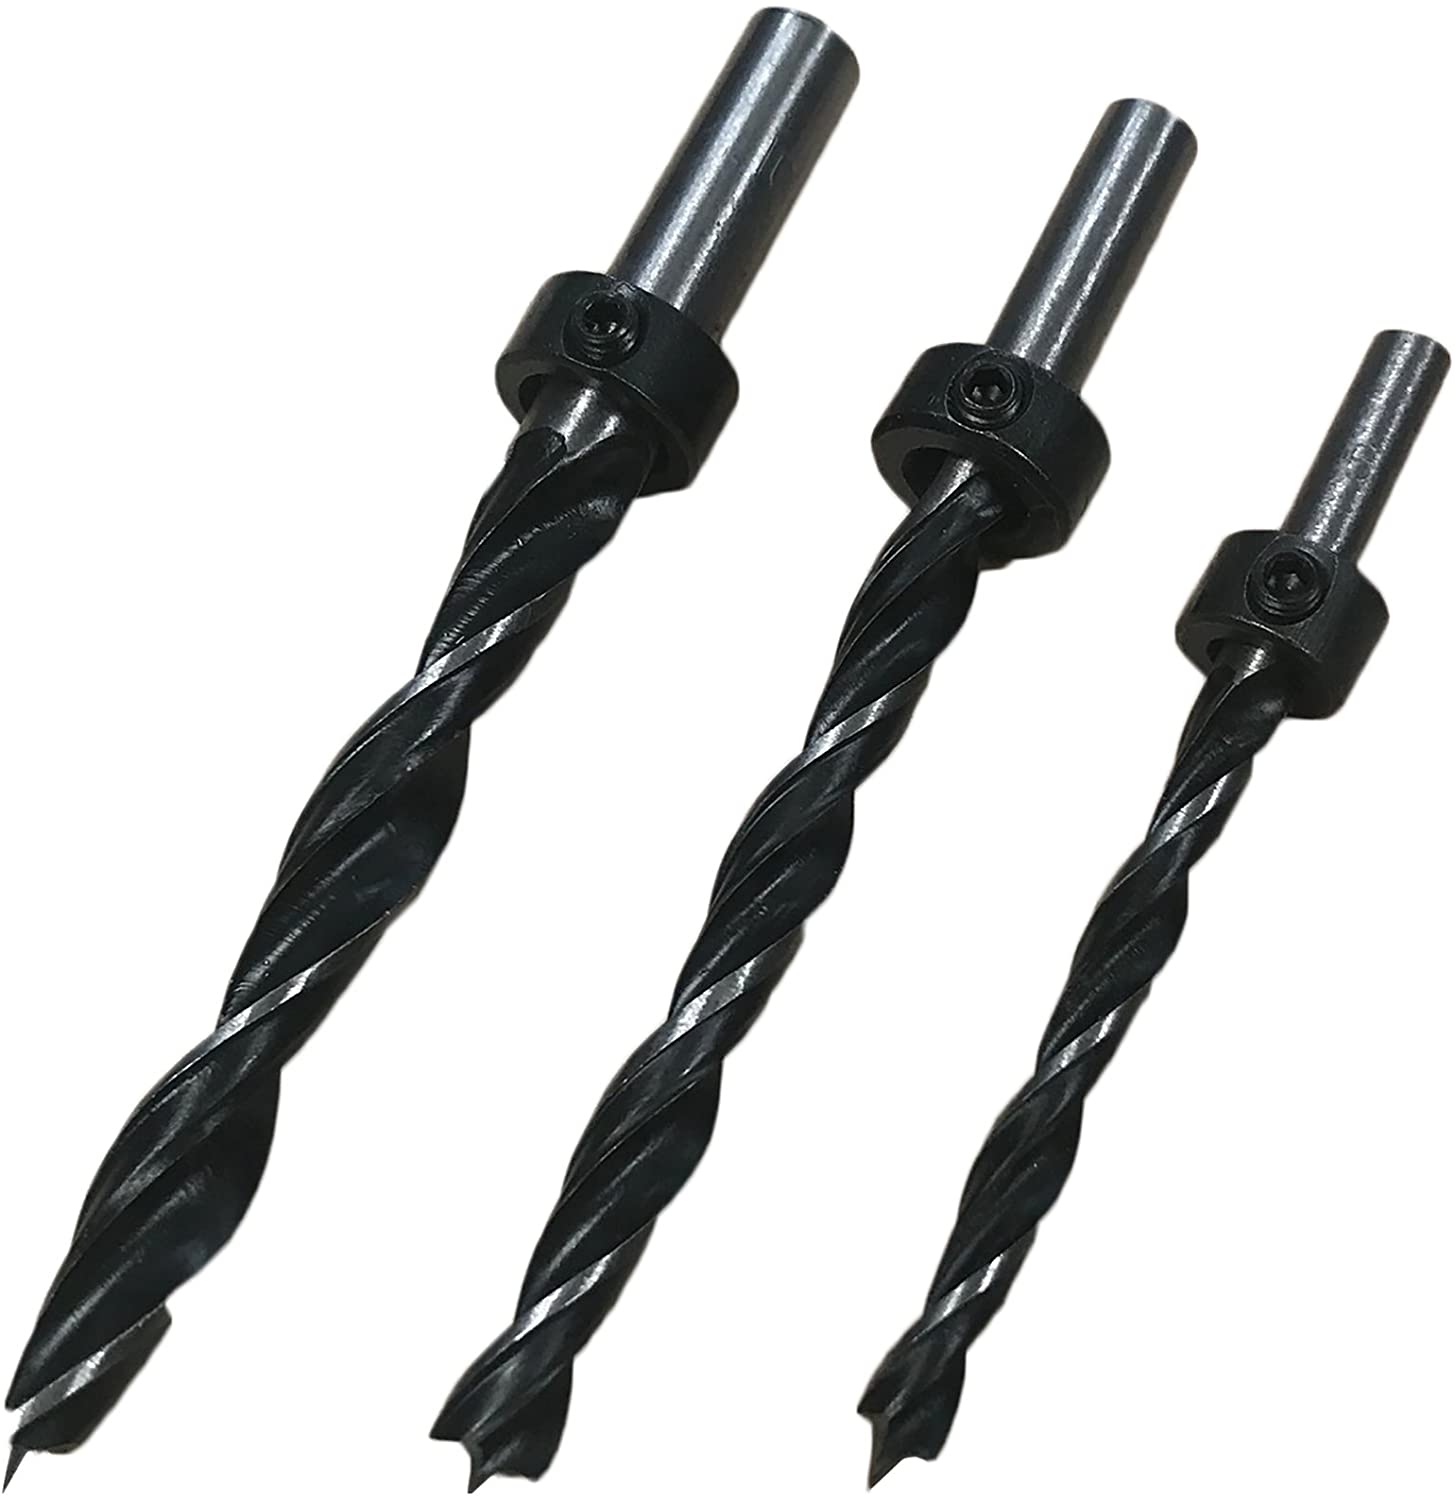 LUPA 3 Piece Drill Bit Set with Depth Collars 6 8 10mm Holes Brad Point Tips Dowel Kit for Timbers and Man-Made Woods (3pc Drill Bits) 